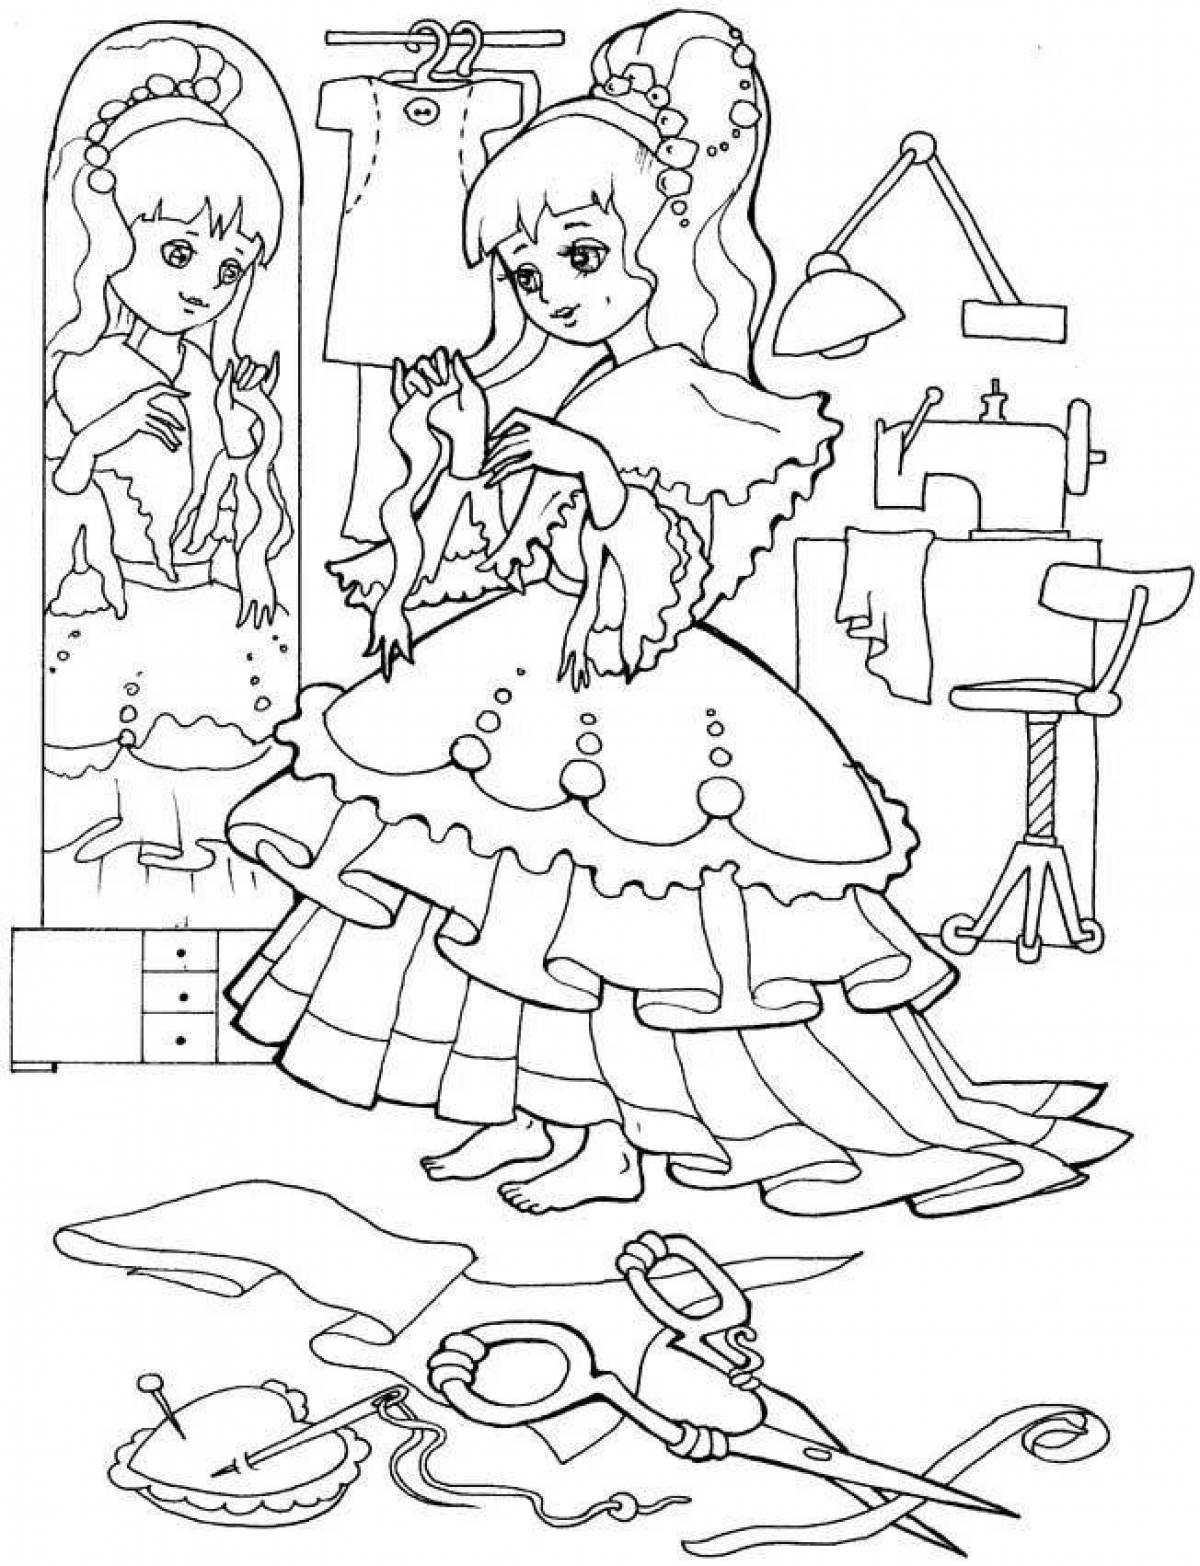 Cute coloring book 8-9 years old for girls